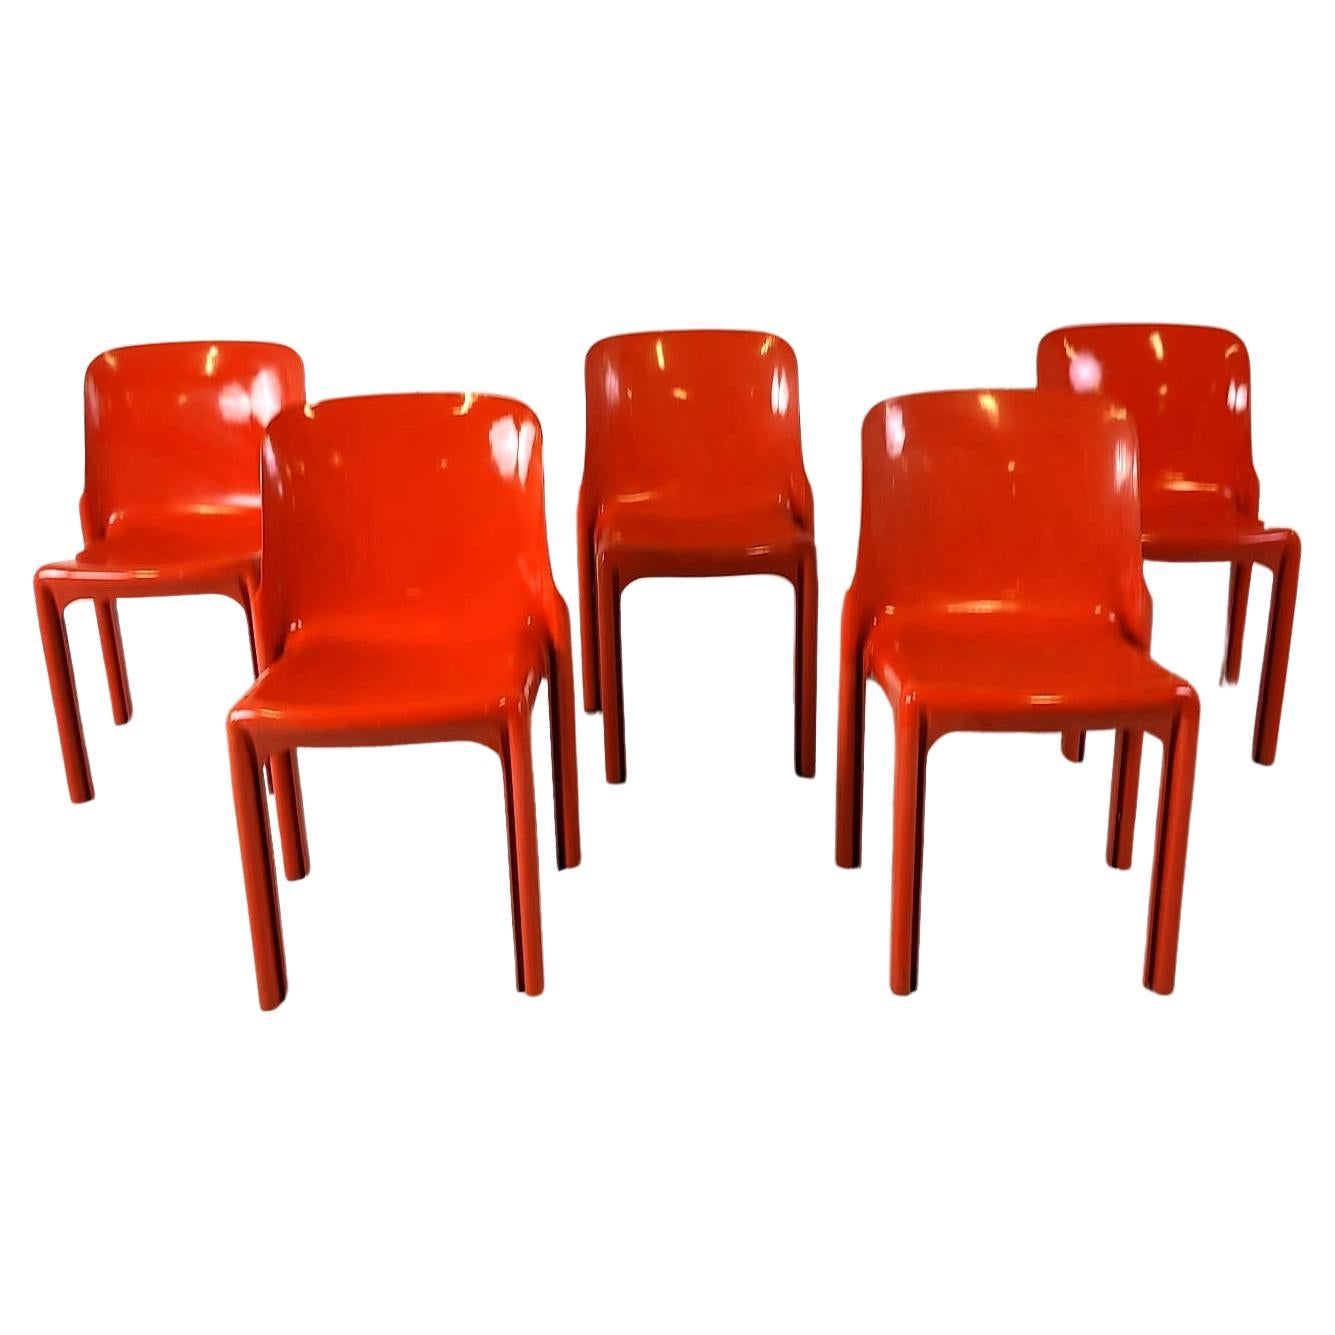 Set of 5 Selene dining chairs by Vico Magistretti for Artemide, 1970s For Sale